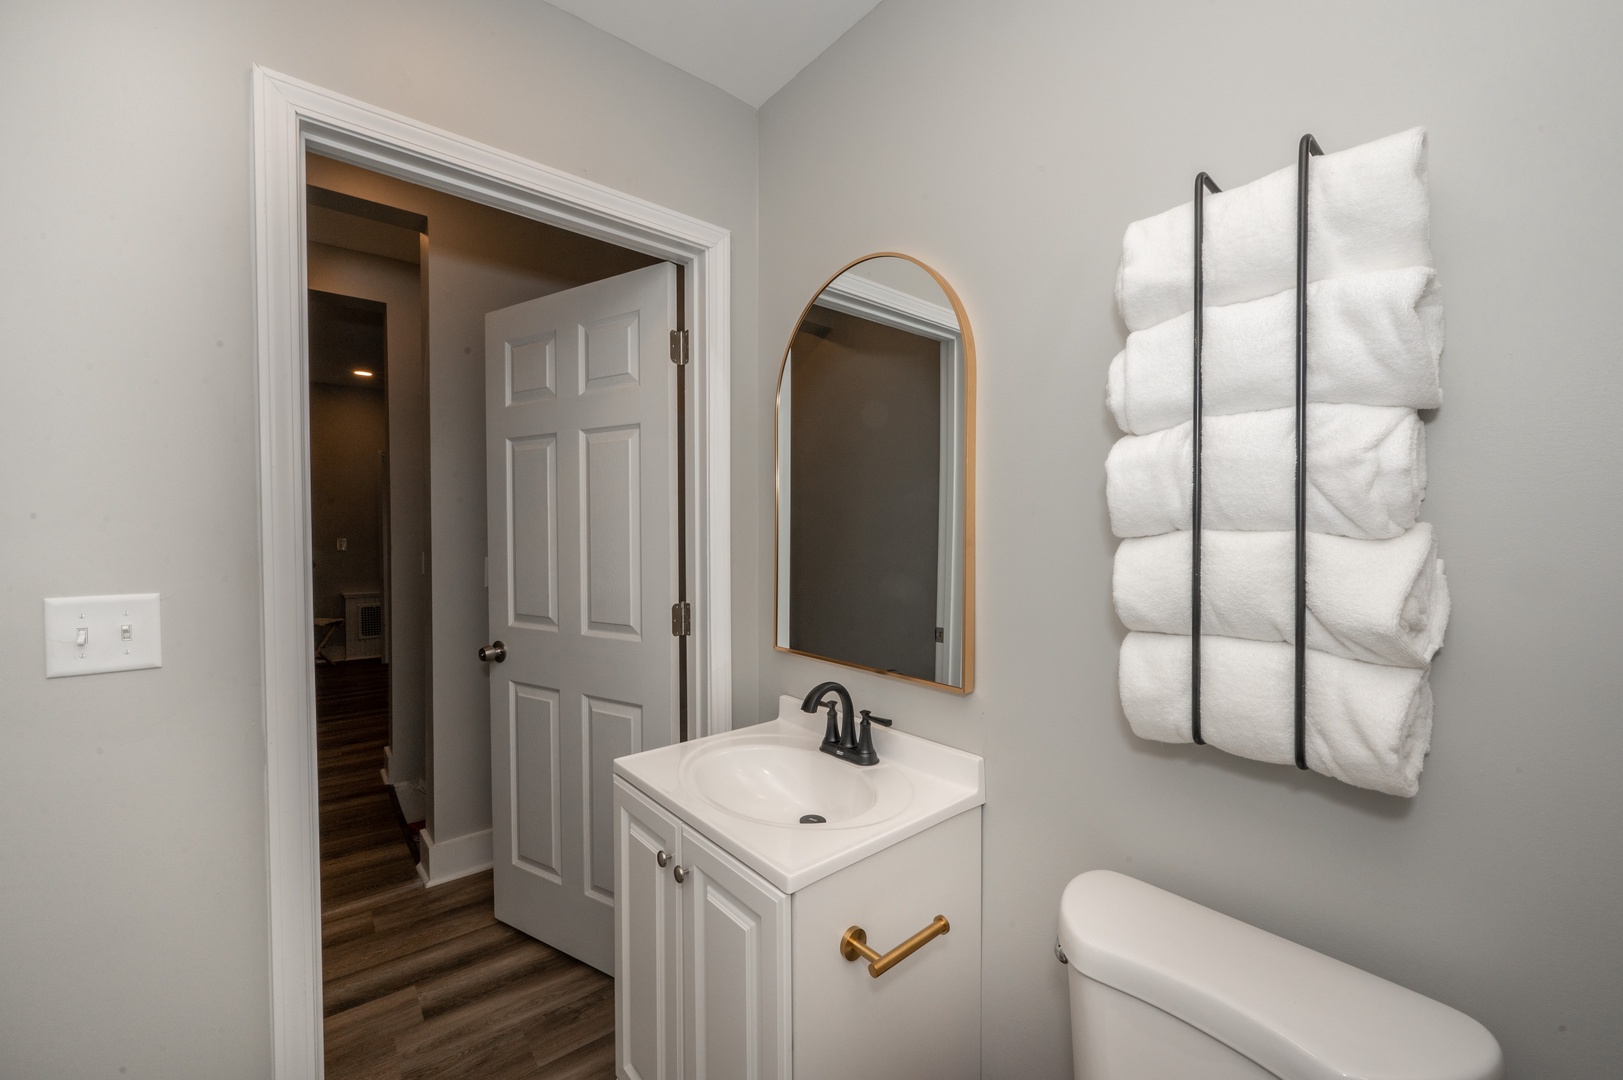 The full bathroom offers guests a single vanity & walk-in shower